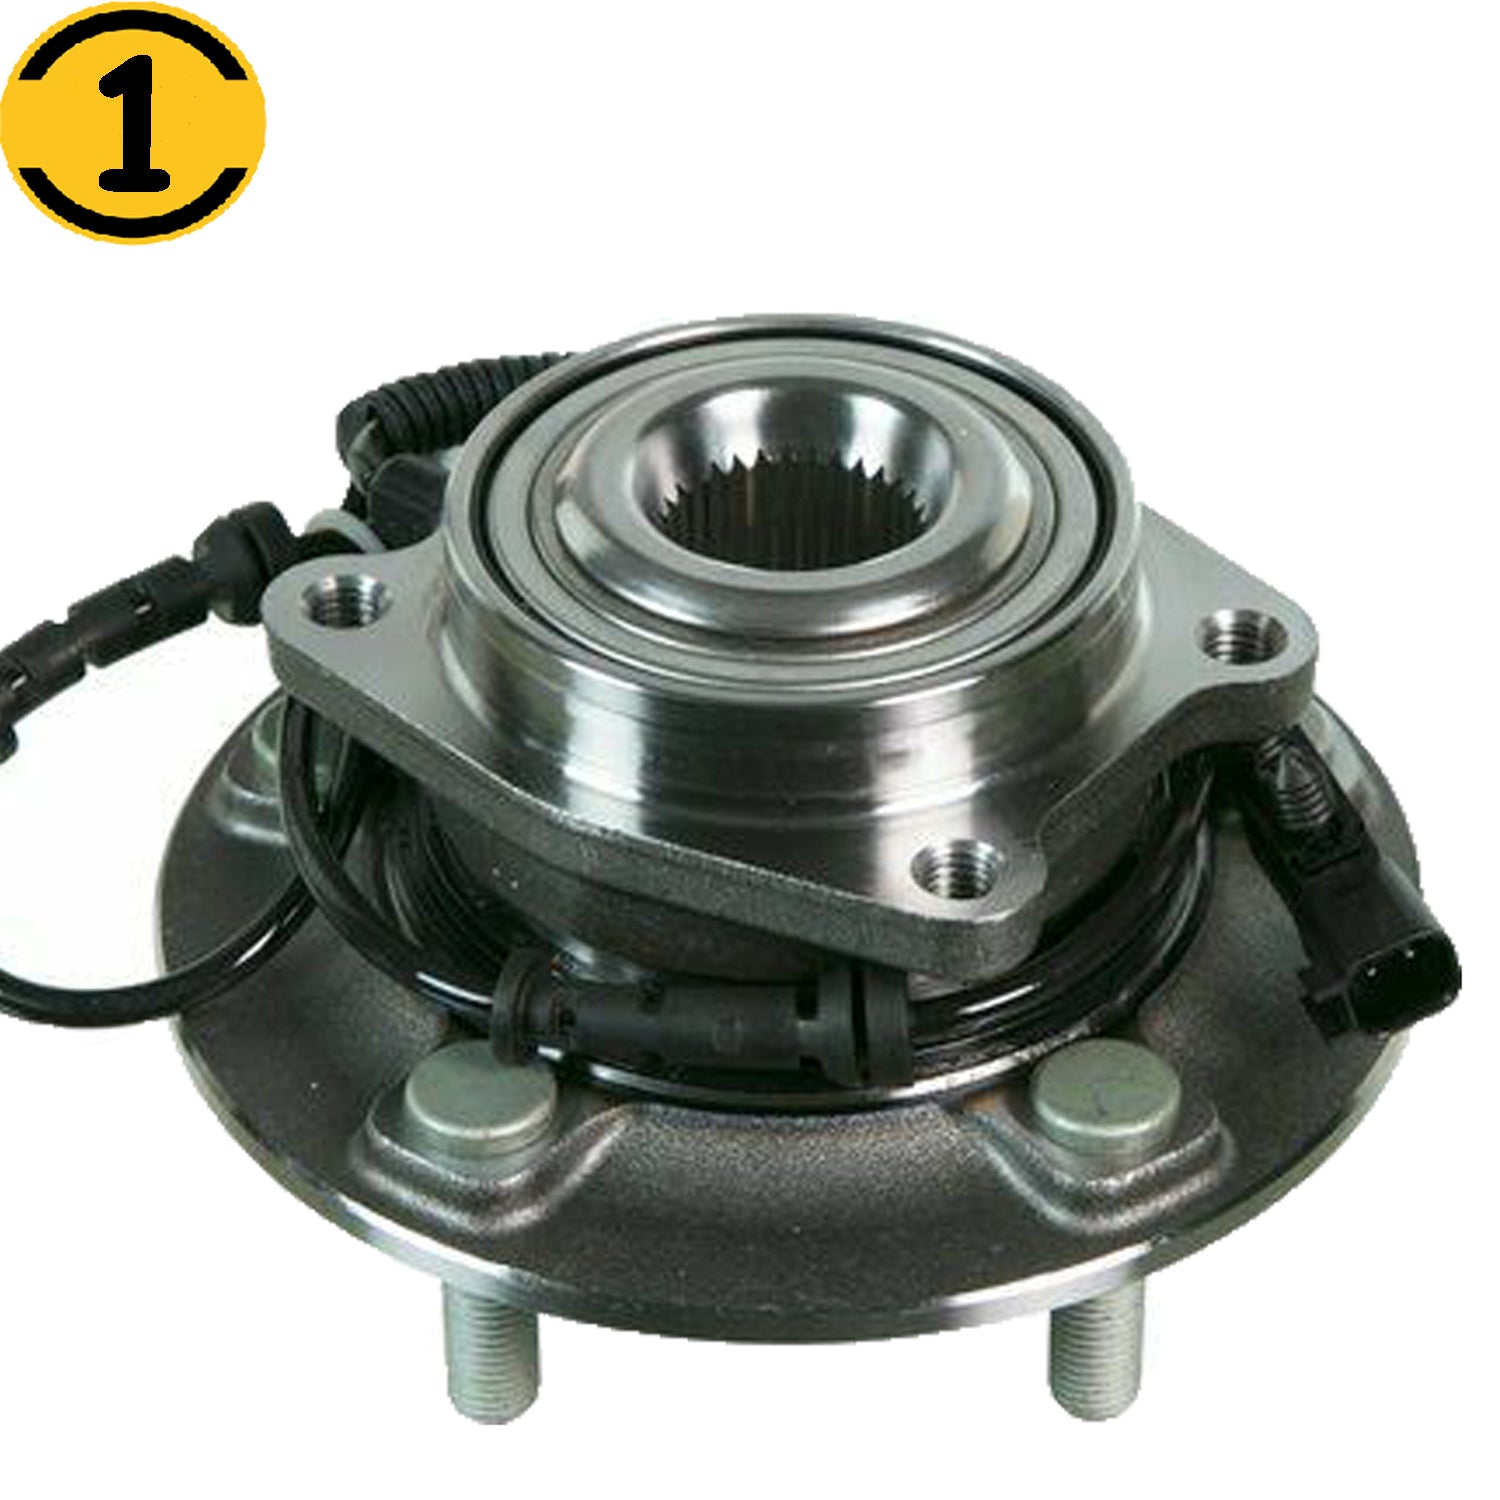 MotorbyMotor 515150 Front Wheel Bearing and Hub Assembly with 5 Lugs for Chrysler Town & Country, Dodge Grand Caravan,Ram C/V,Volkswagen Routan Low-Runout OE Directly Replacement Hub Bearing w/ABS MotorbyMotor